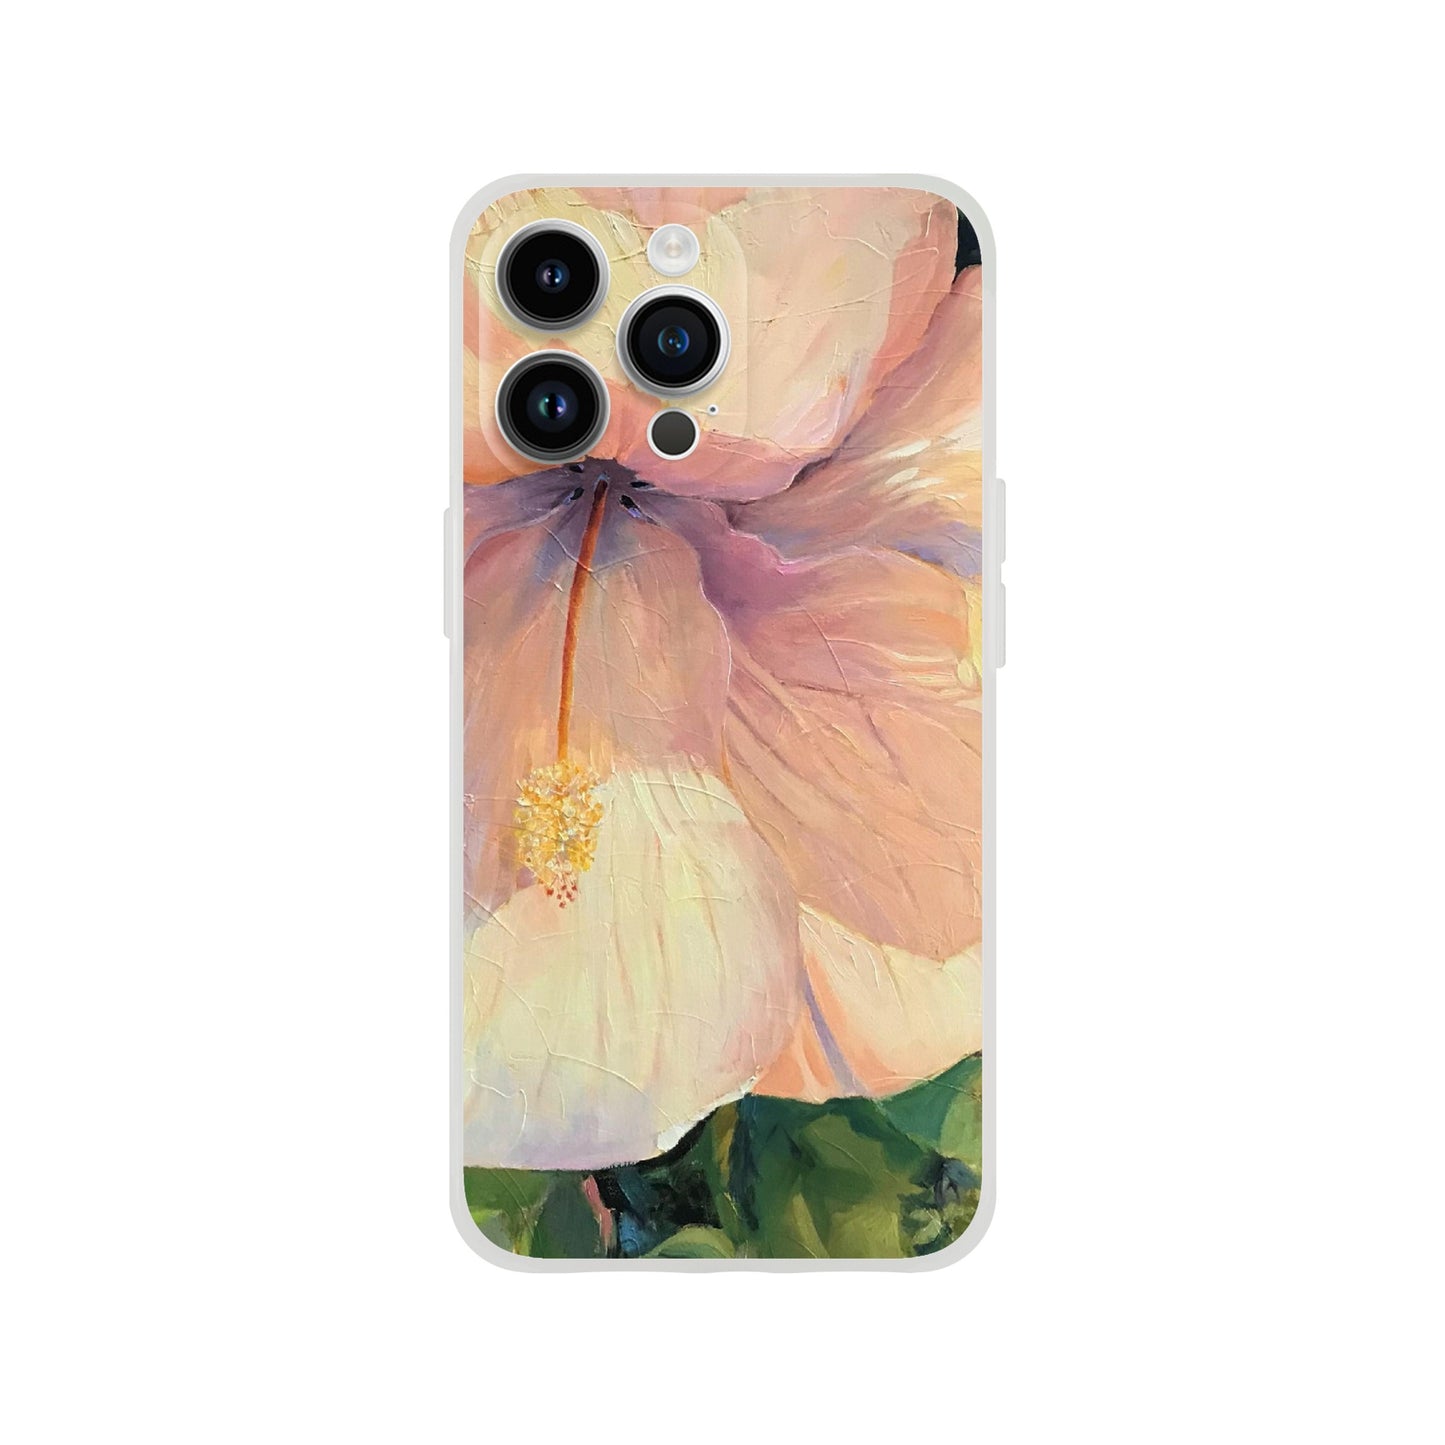 "Hibiscus" Flexi Phone Case for Iphone or Samsung by Barbara Cleary Designs